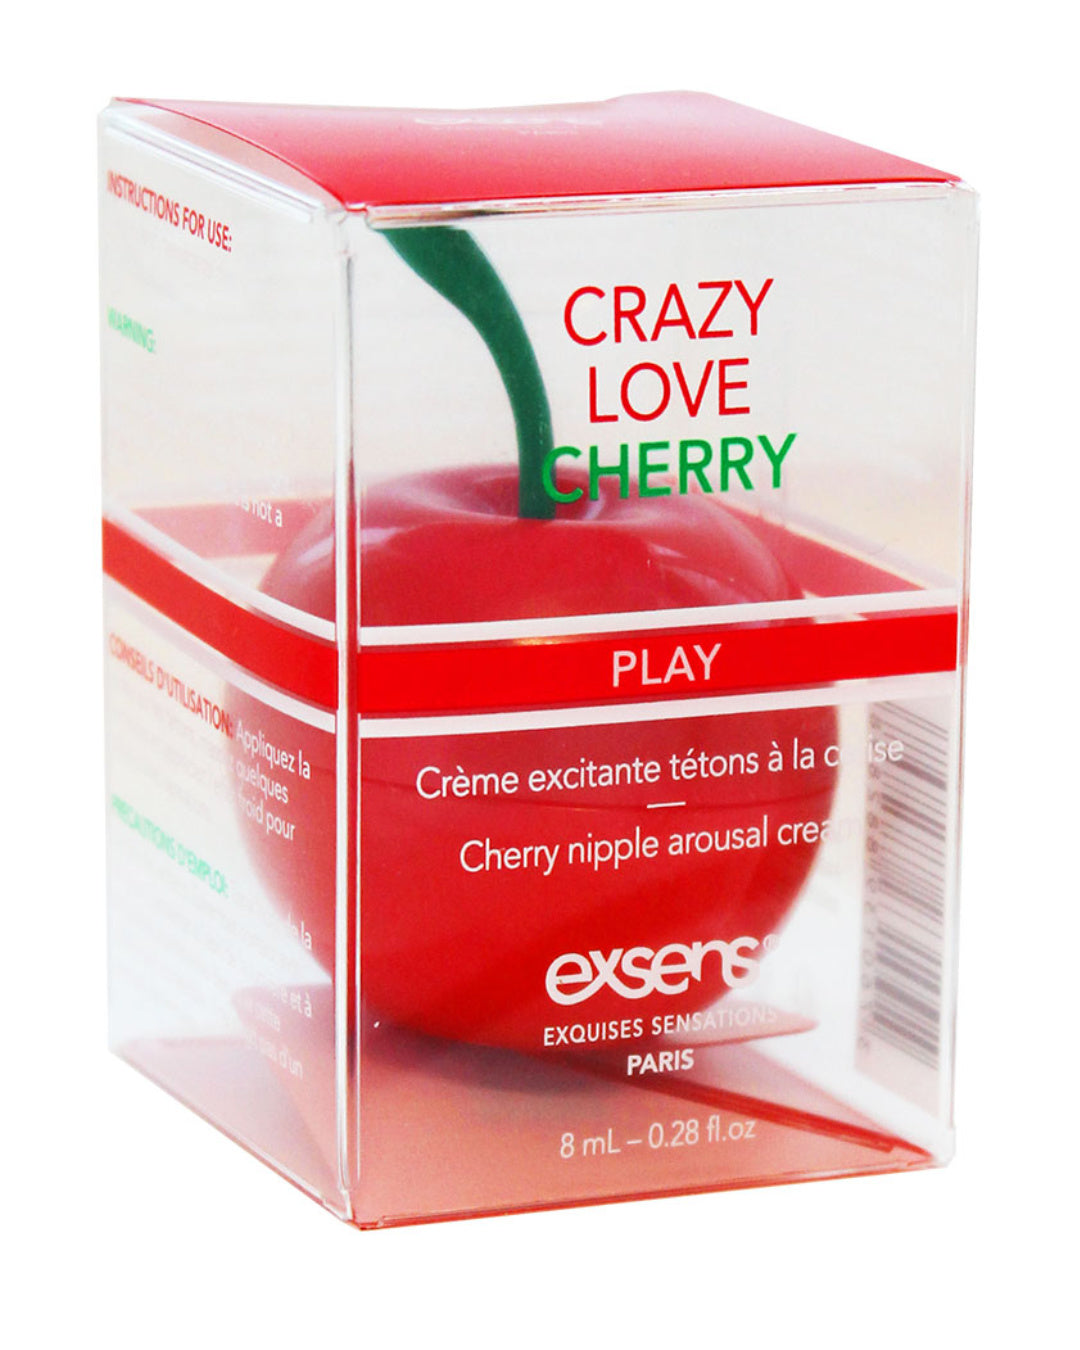 Exsens of Paris Crazy Love Cherry Flavored Nipple Arousal Cream in the package